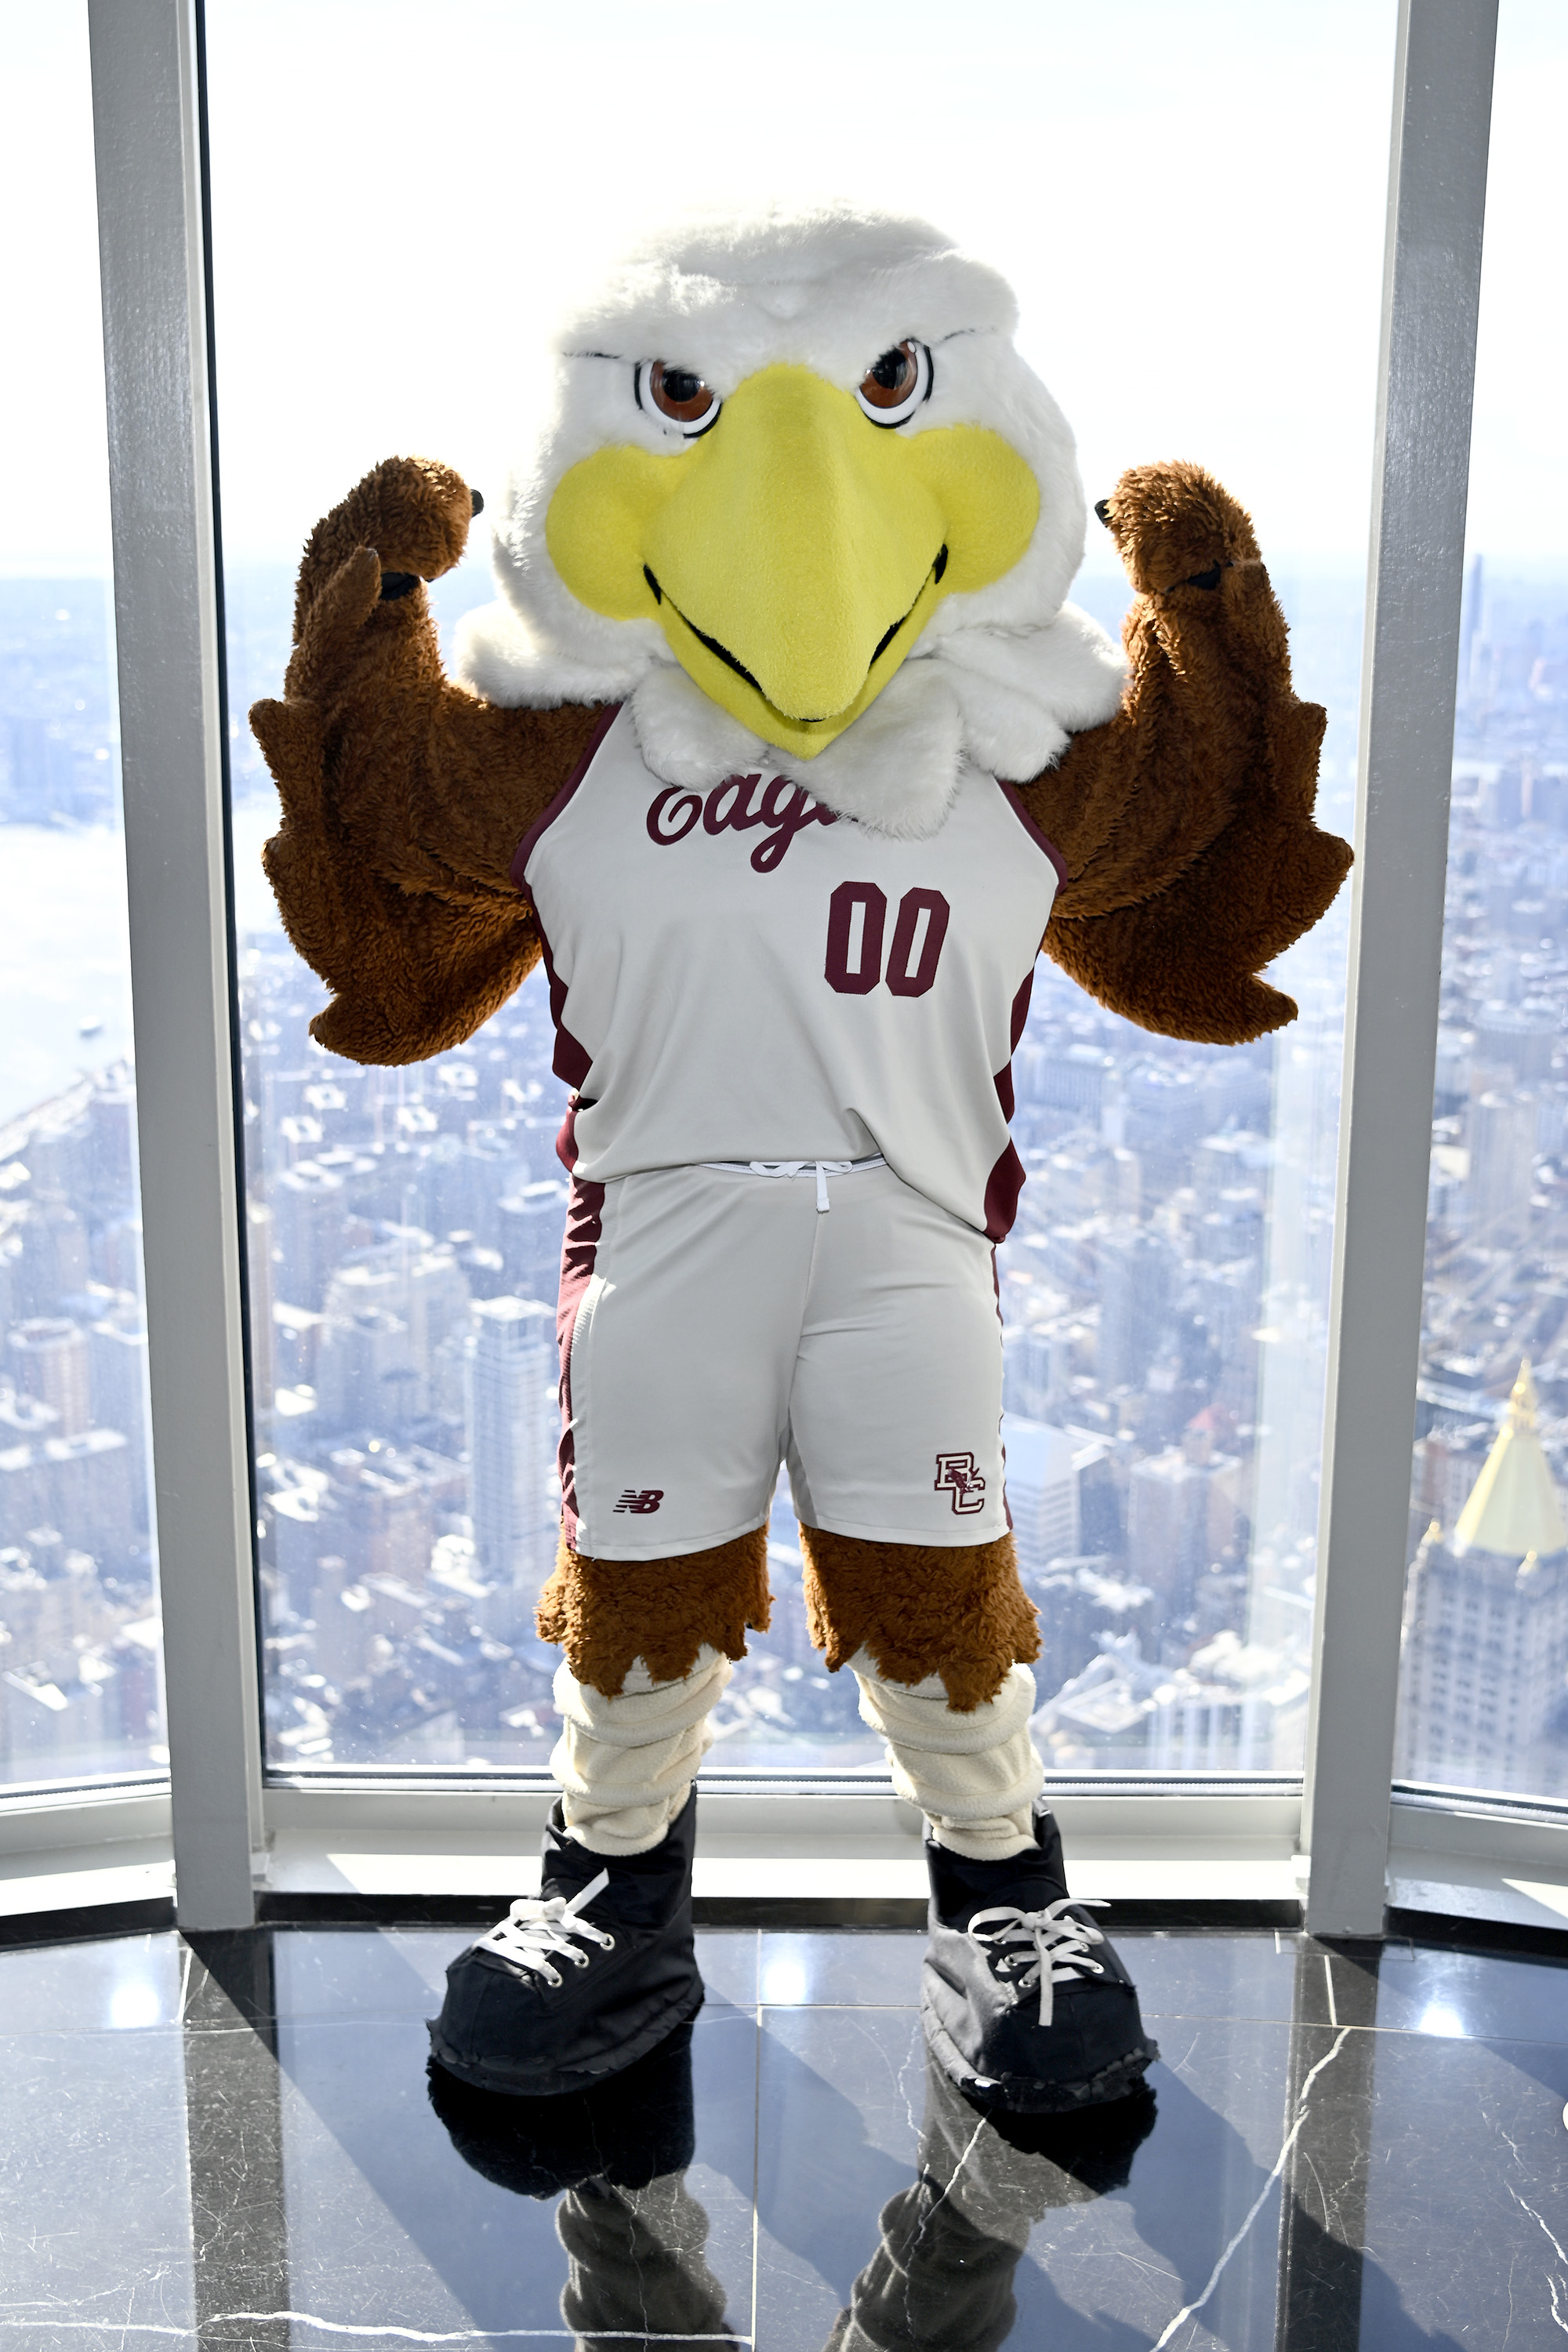 ACC Mascots Visit the Empire State Building in Advance of the Tournament